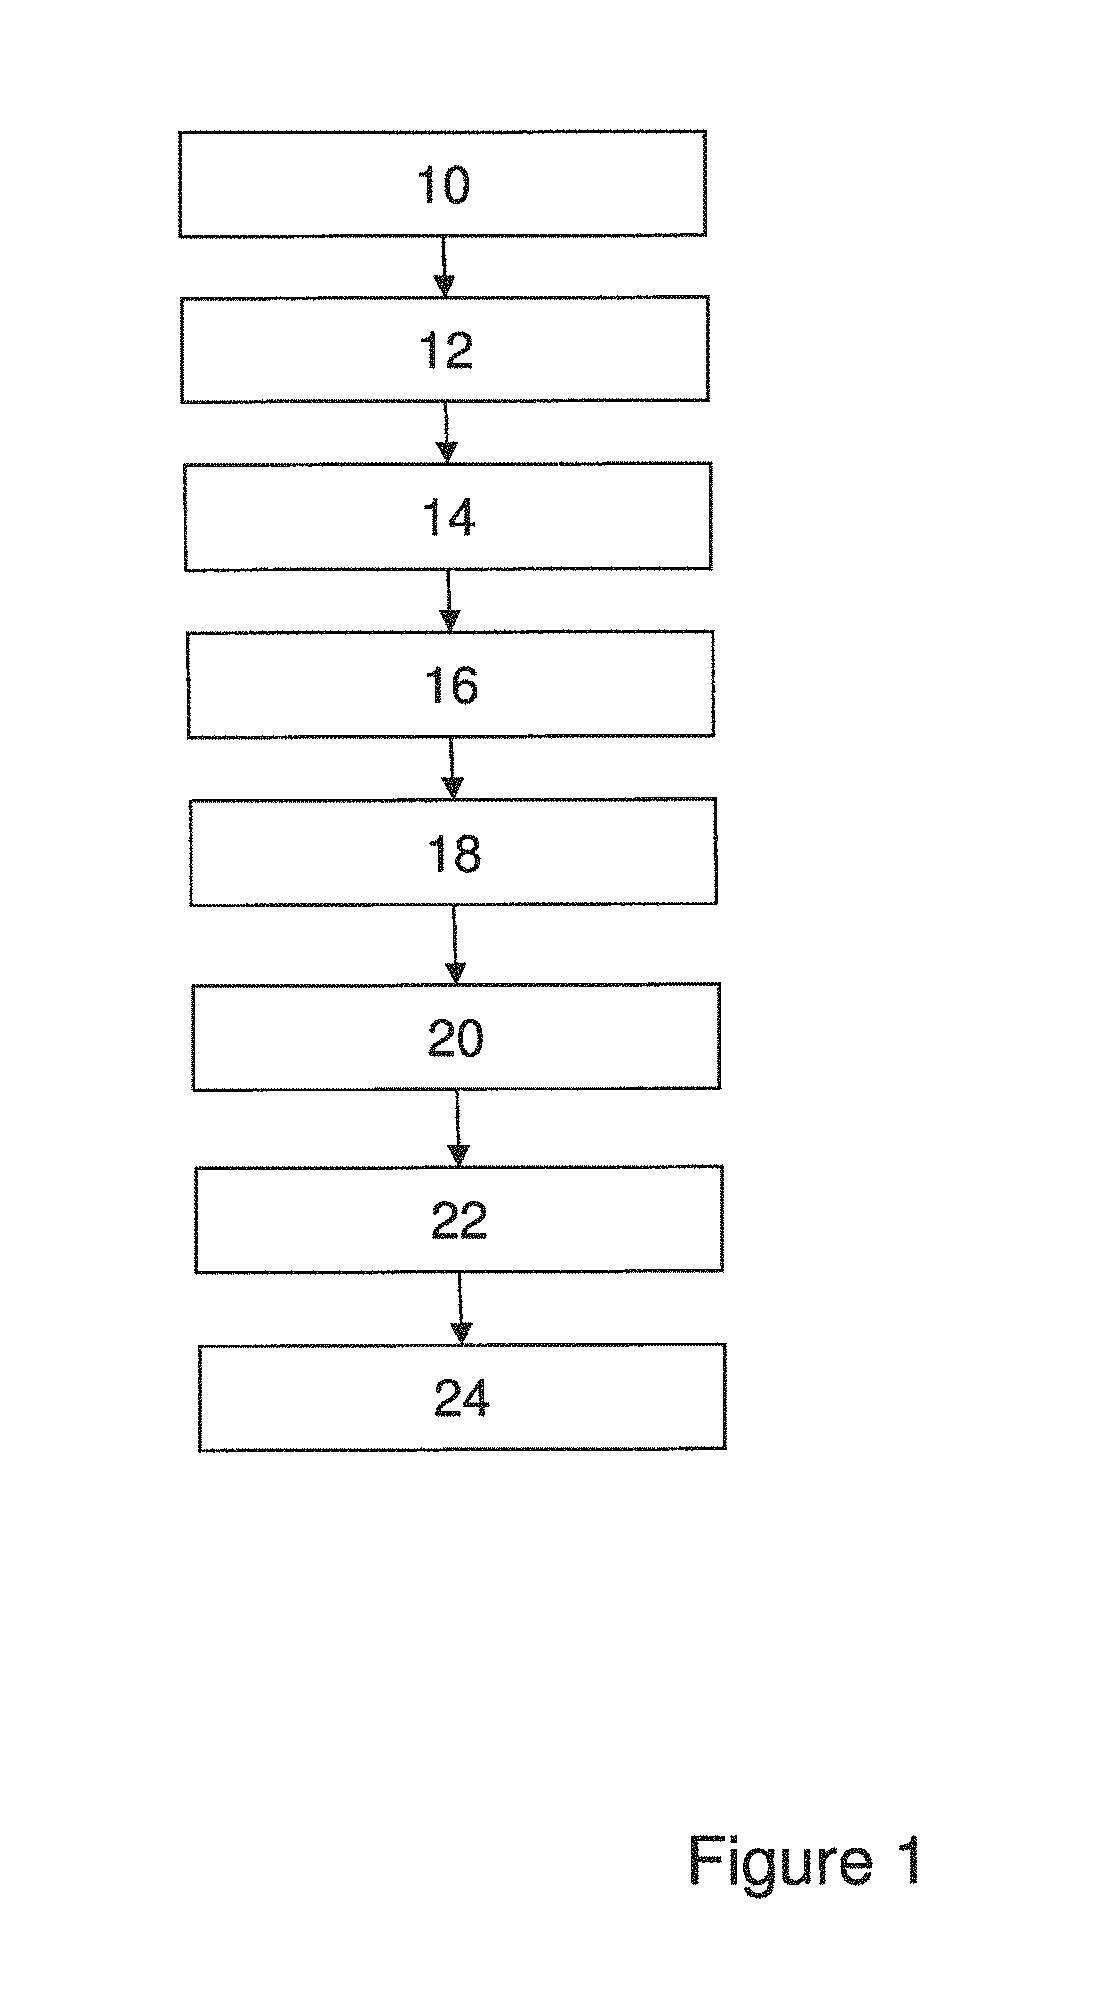 Method and apparatus for producing an acoustic field